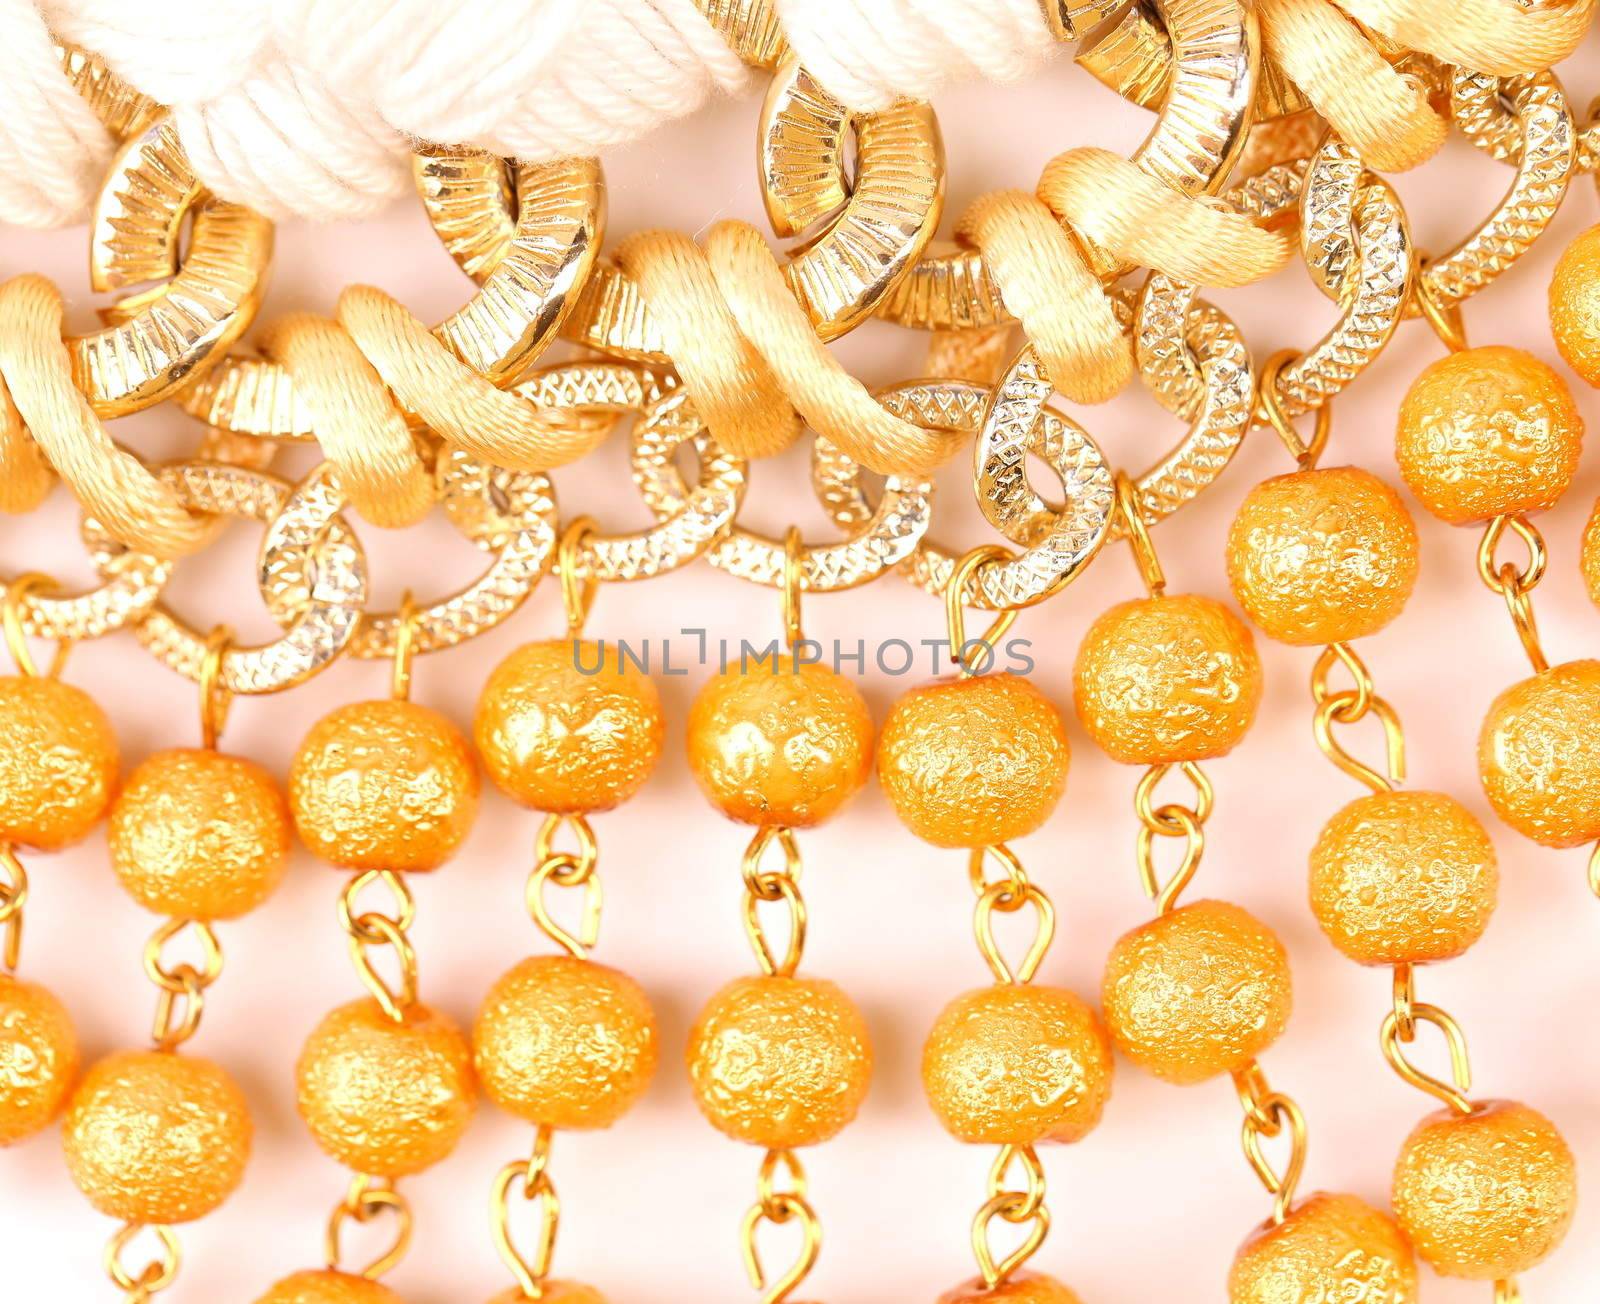 Golden pearls with macrame close-up on a whole background